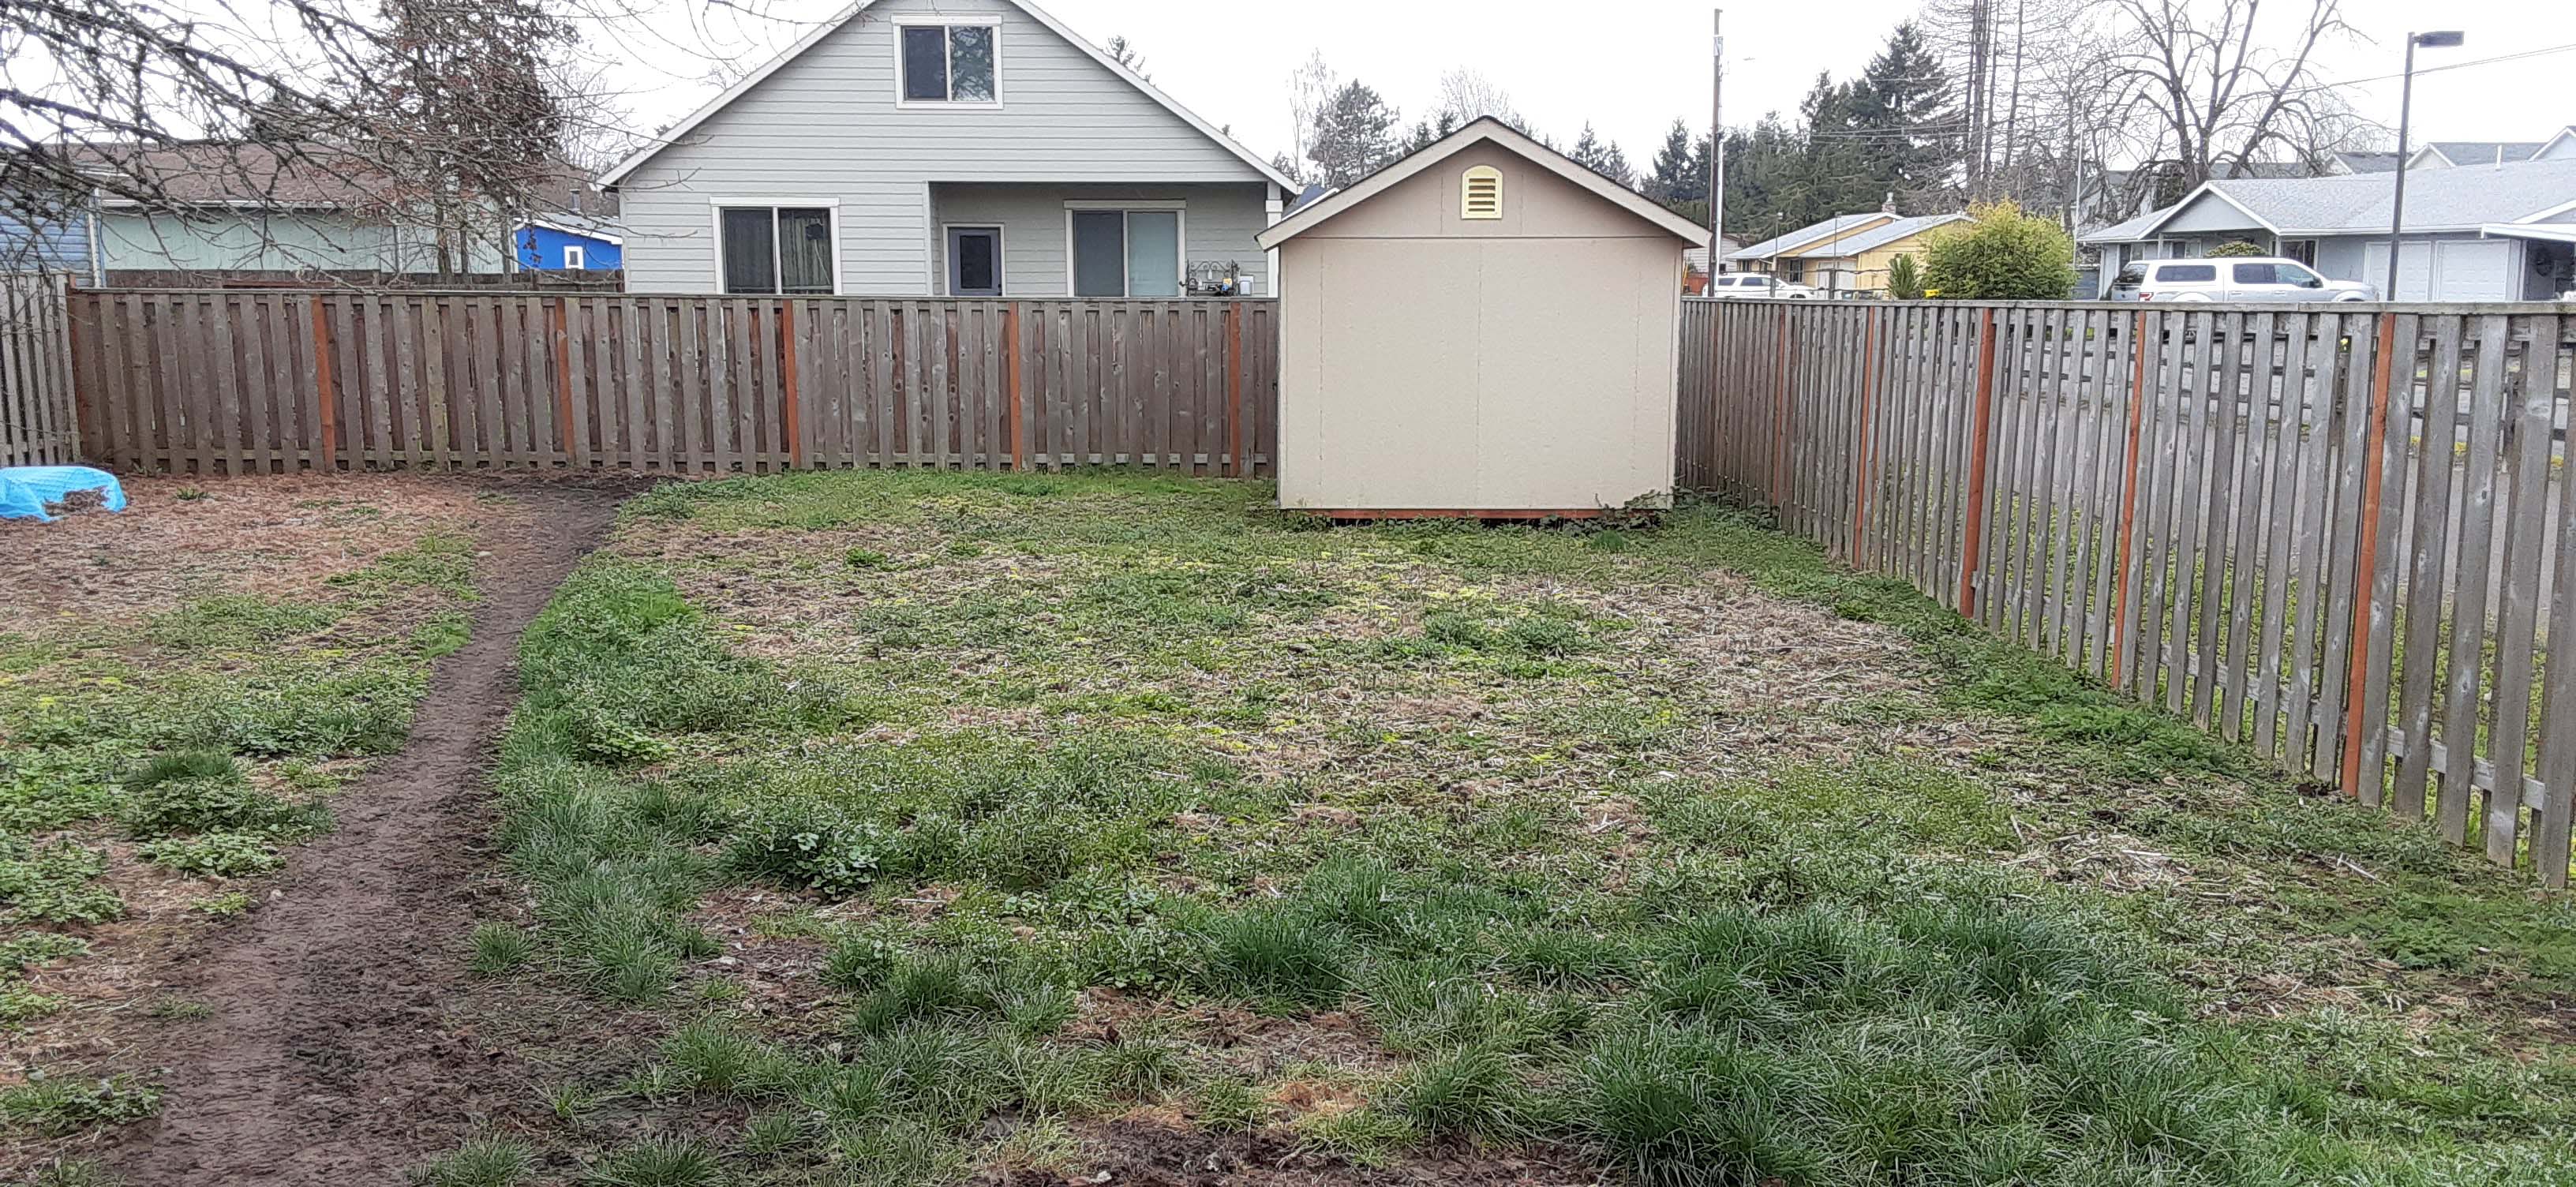 Backyard with patchy grass, dirt path and shed